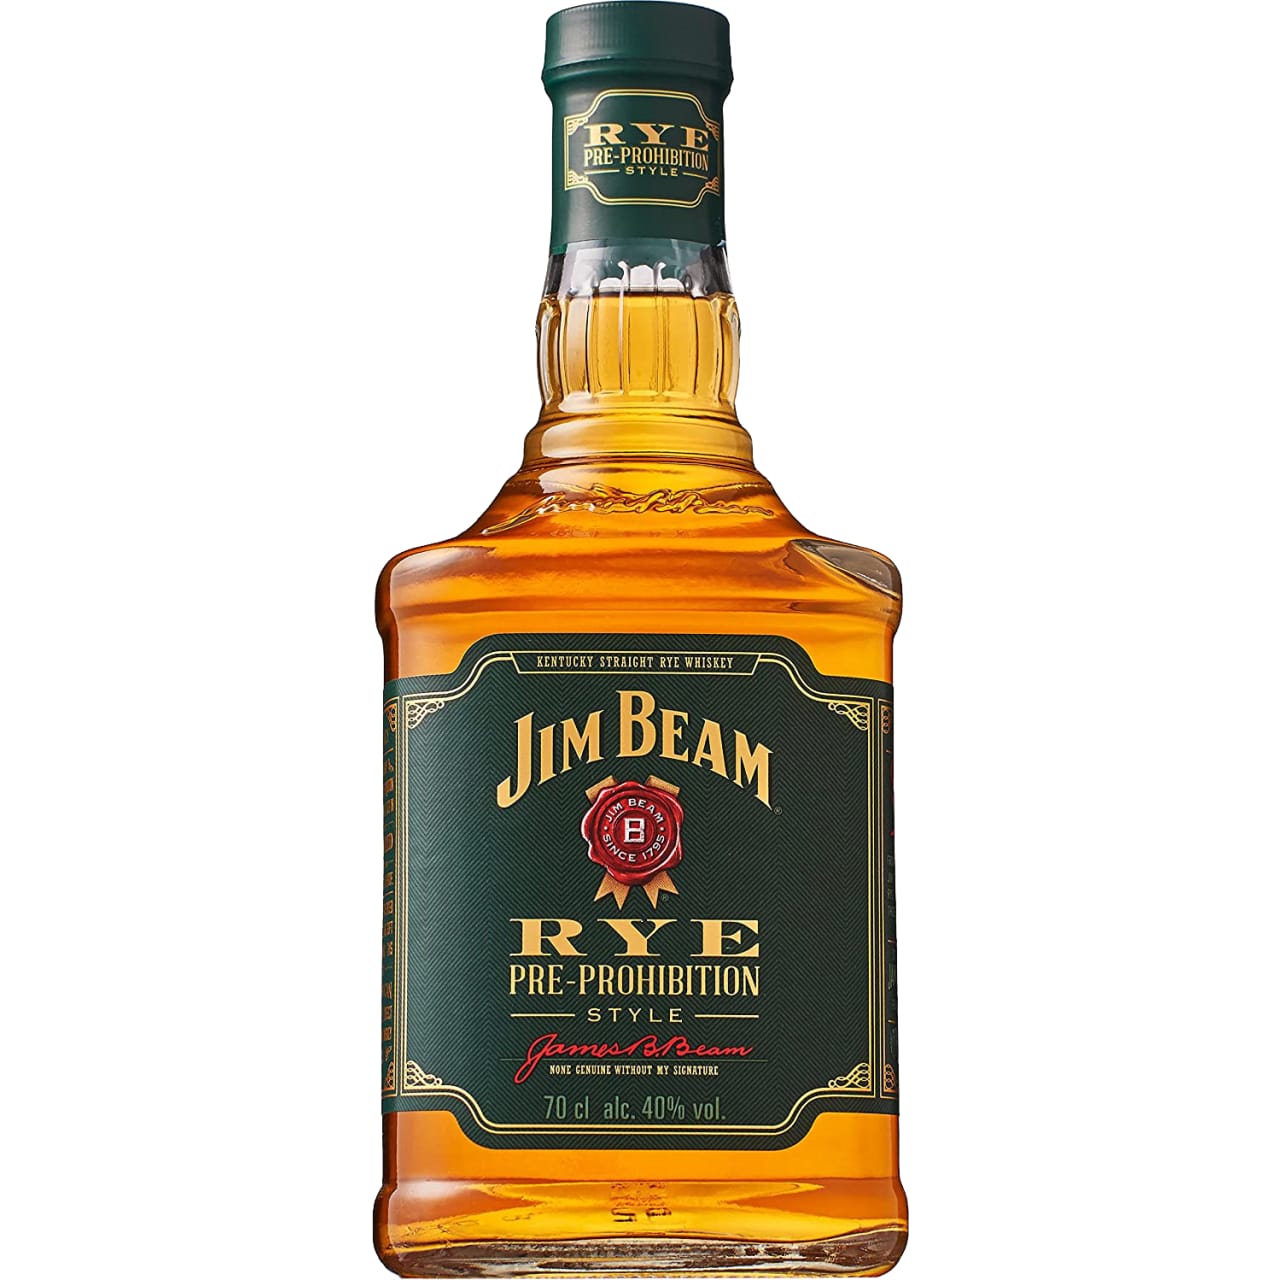 Aged for 4 years in charred oak barrels, the Yellow Label whiskey is America's best selling straight rye. With a distinctive spicy flavour and long, soft finish, Jim Beam Rye is an interesting change for those who want to broaden their Bourbon horizons.